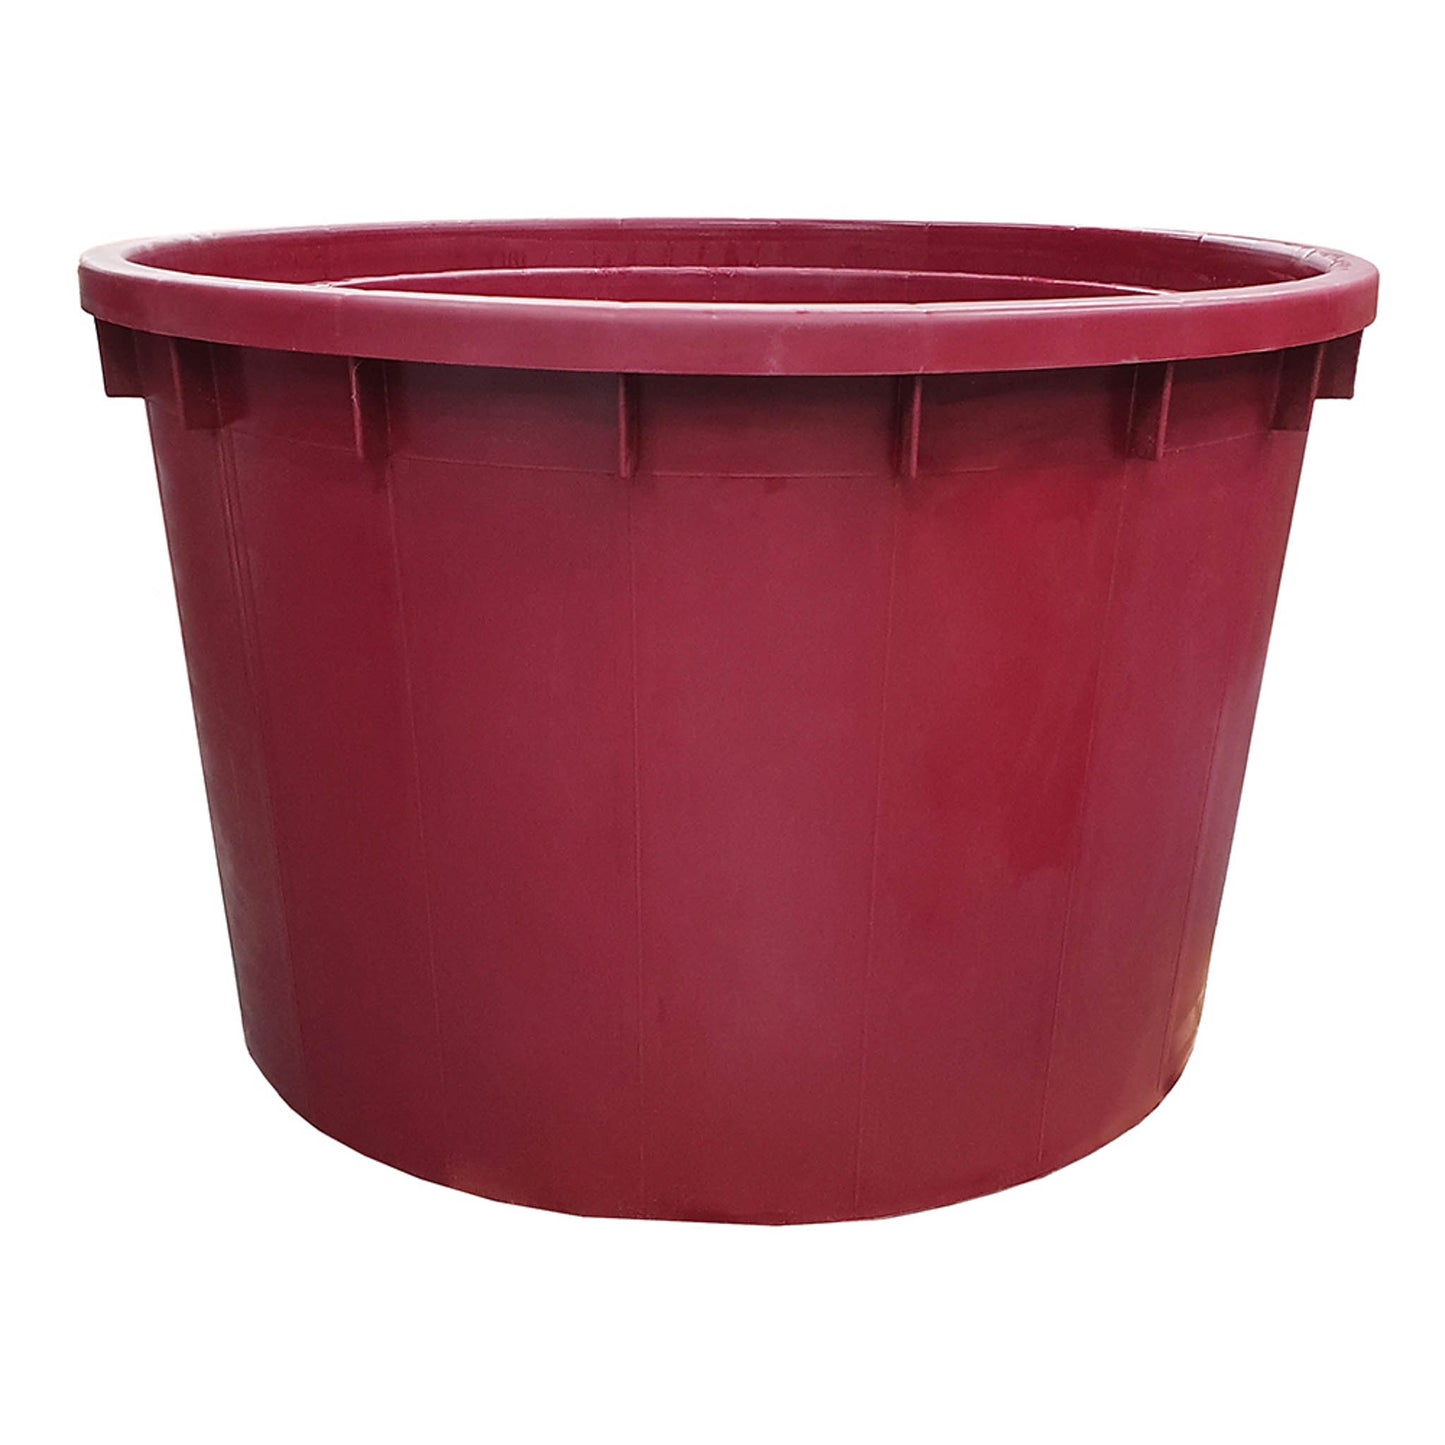 Italian Made 350 litre red food grade plastic wine vat for storing and fermenting wine